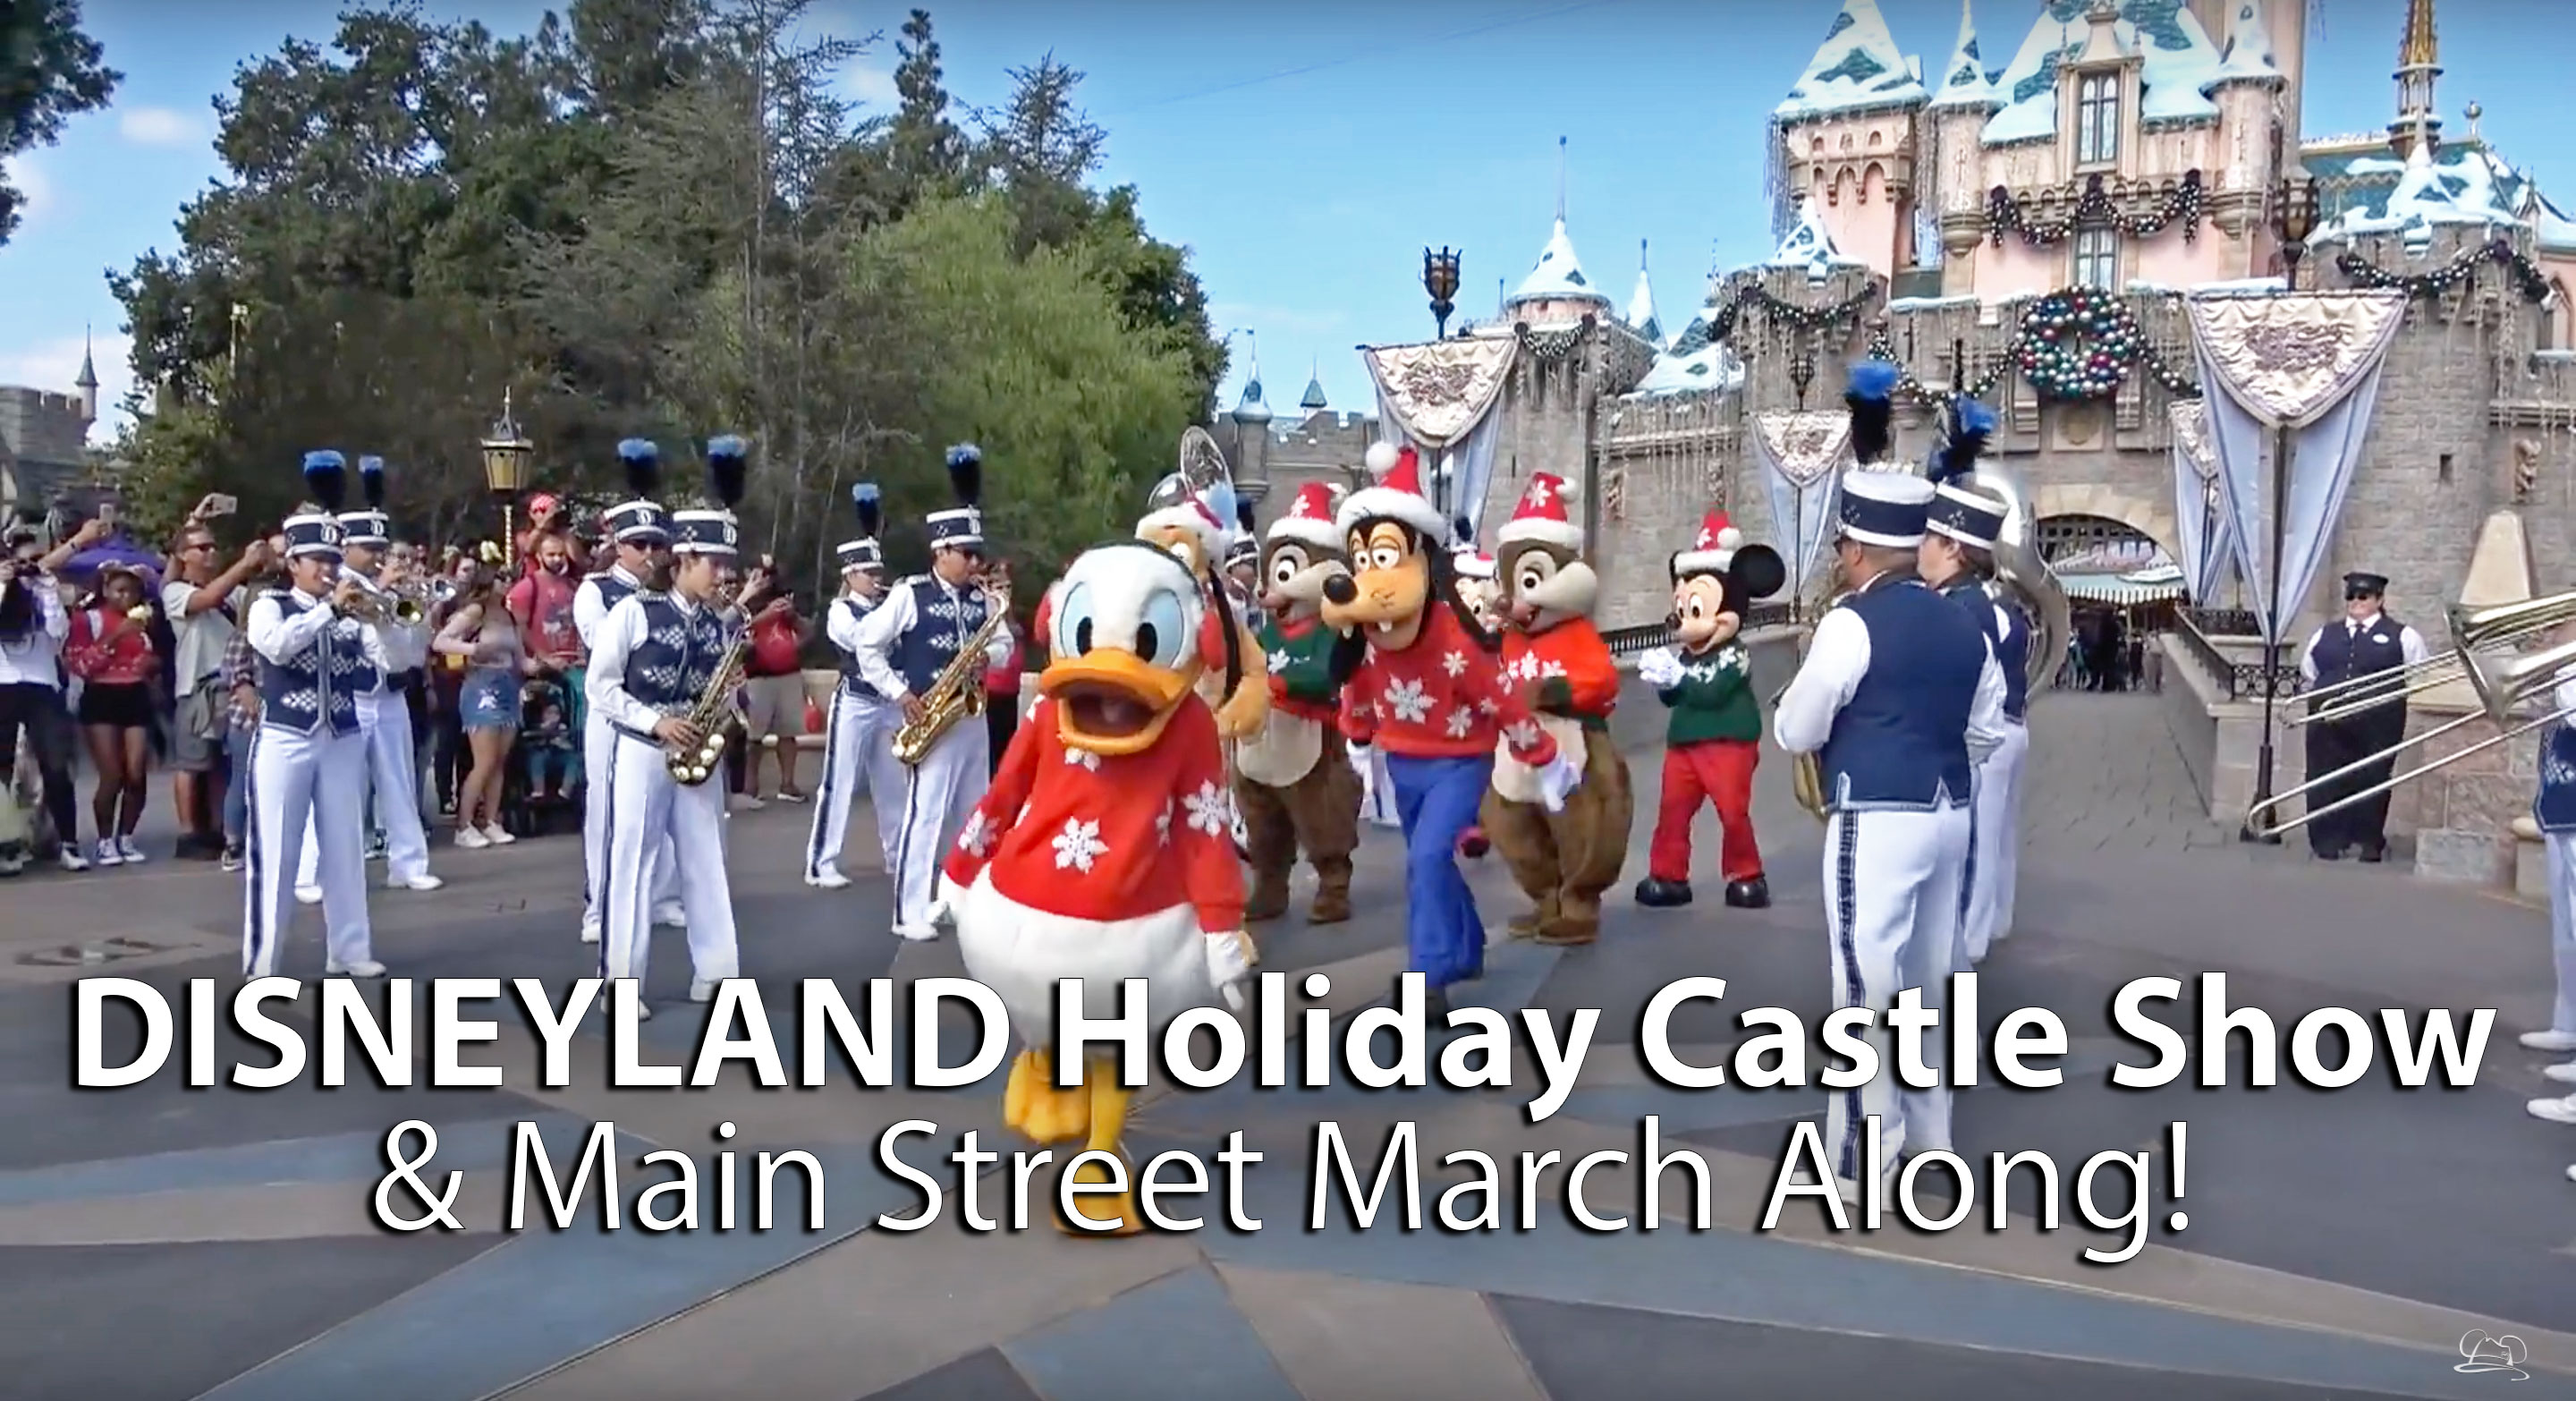 Castle Show and Main Street March Along Takes on Holiday Flair